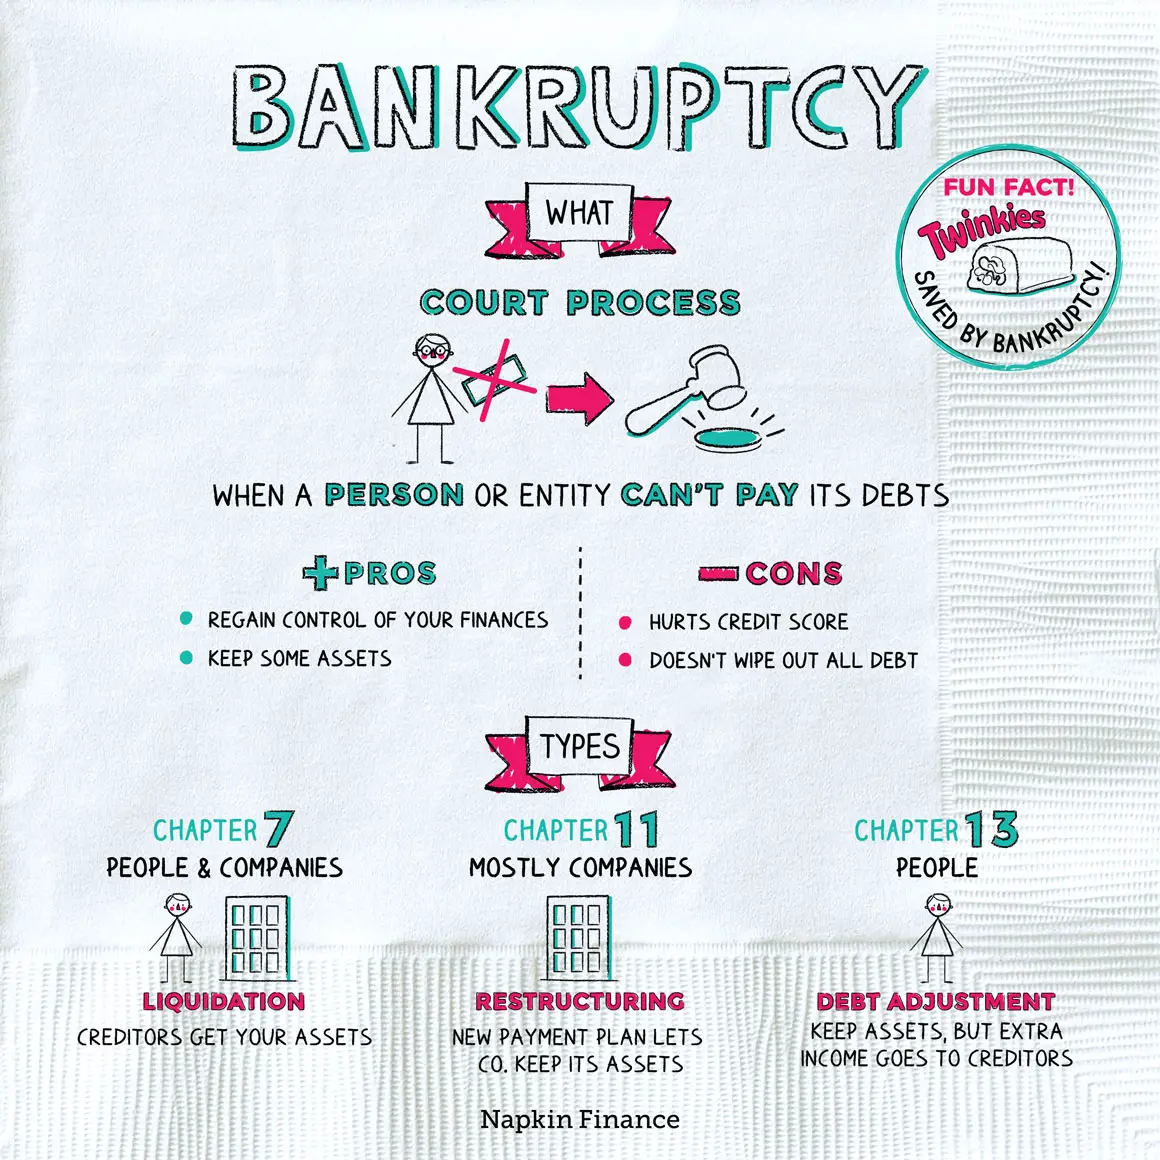 What Not to Do While Filing a Chapter 7 Bankruptcy